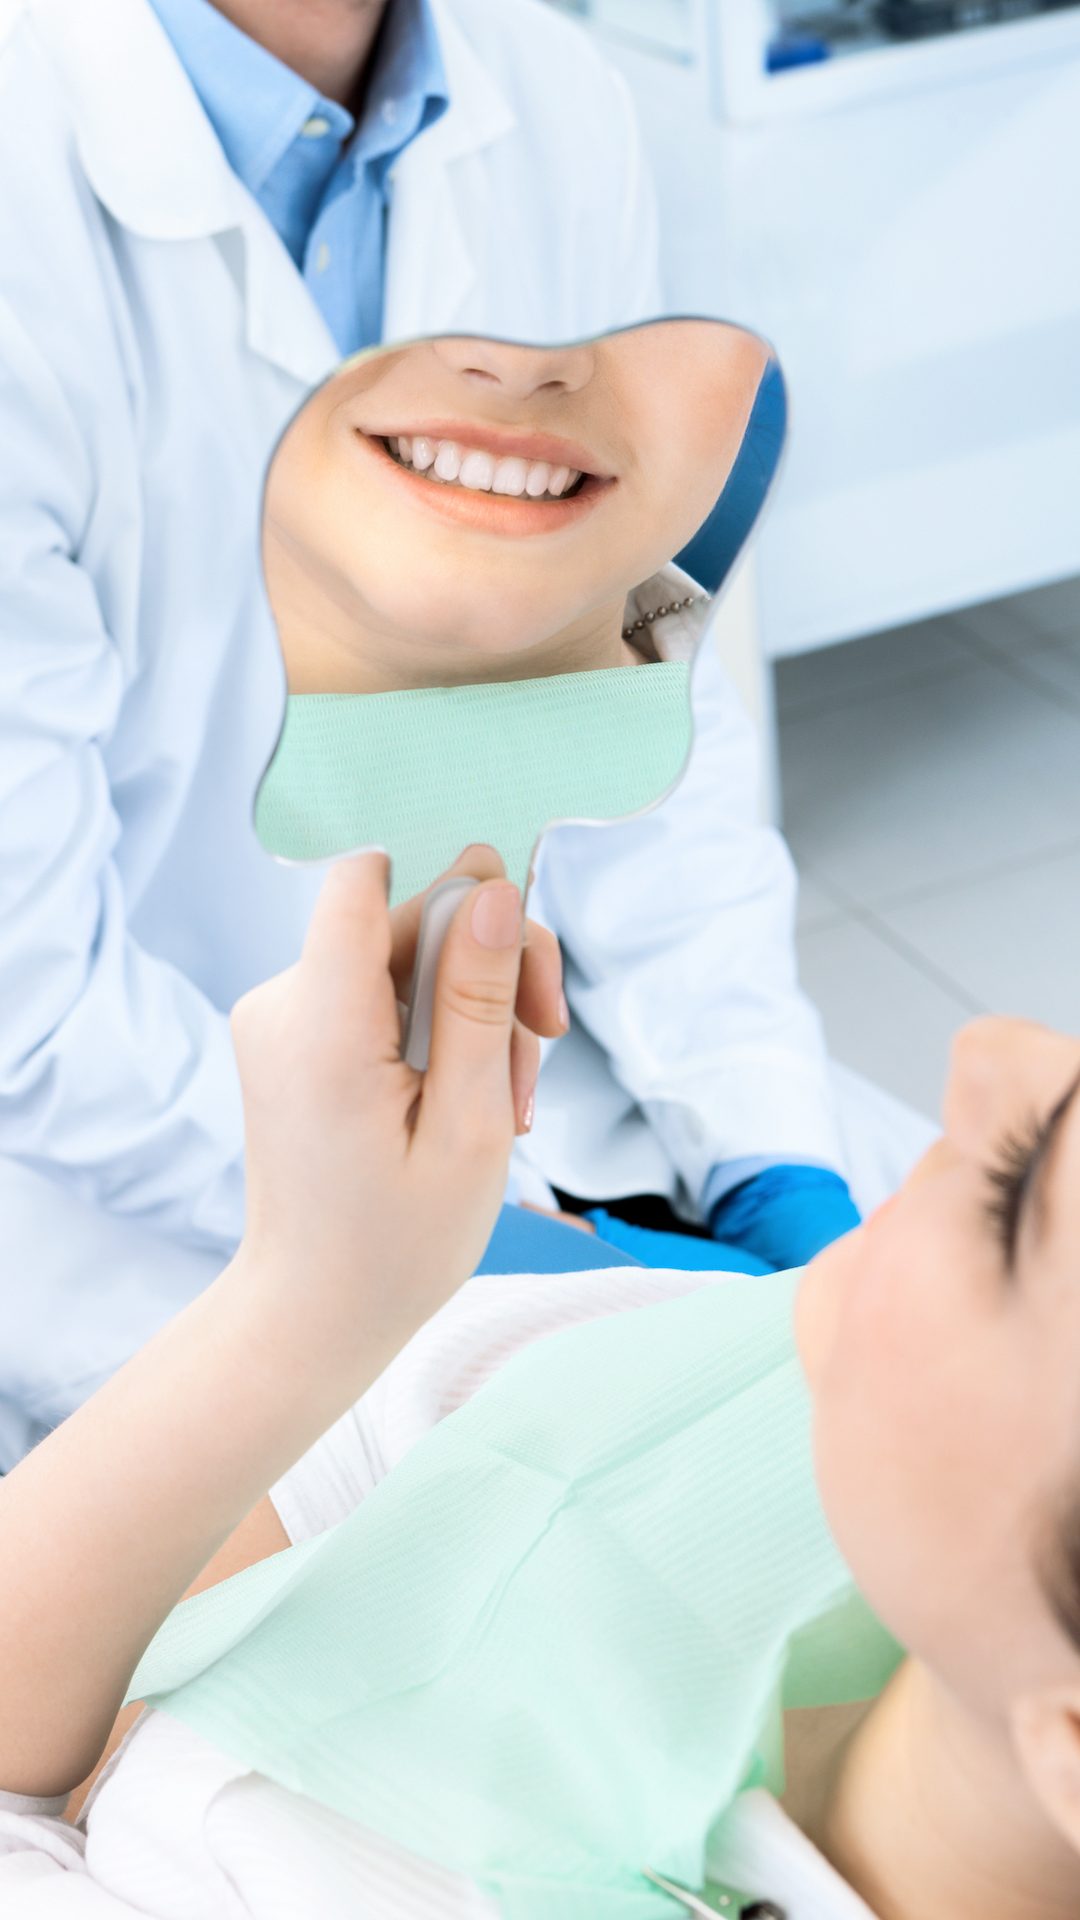 The patient admires her smile looking at the mirror after the treatment